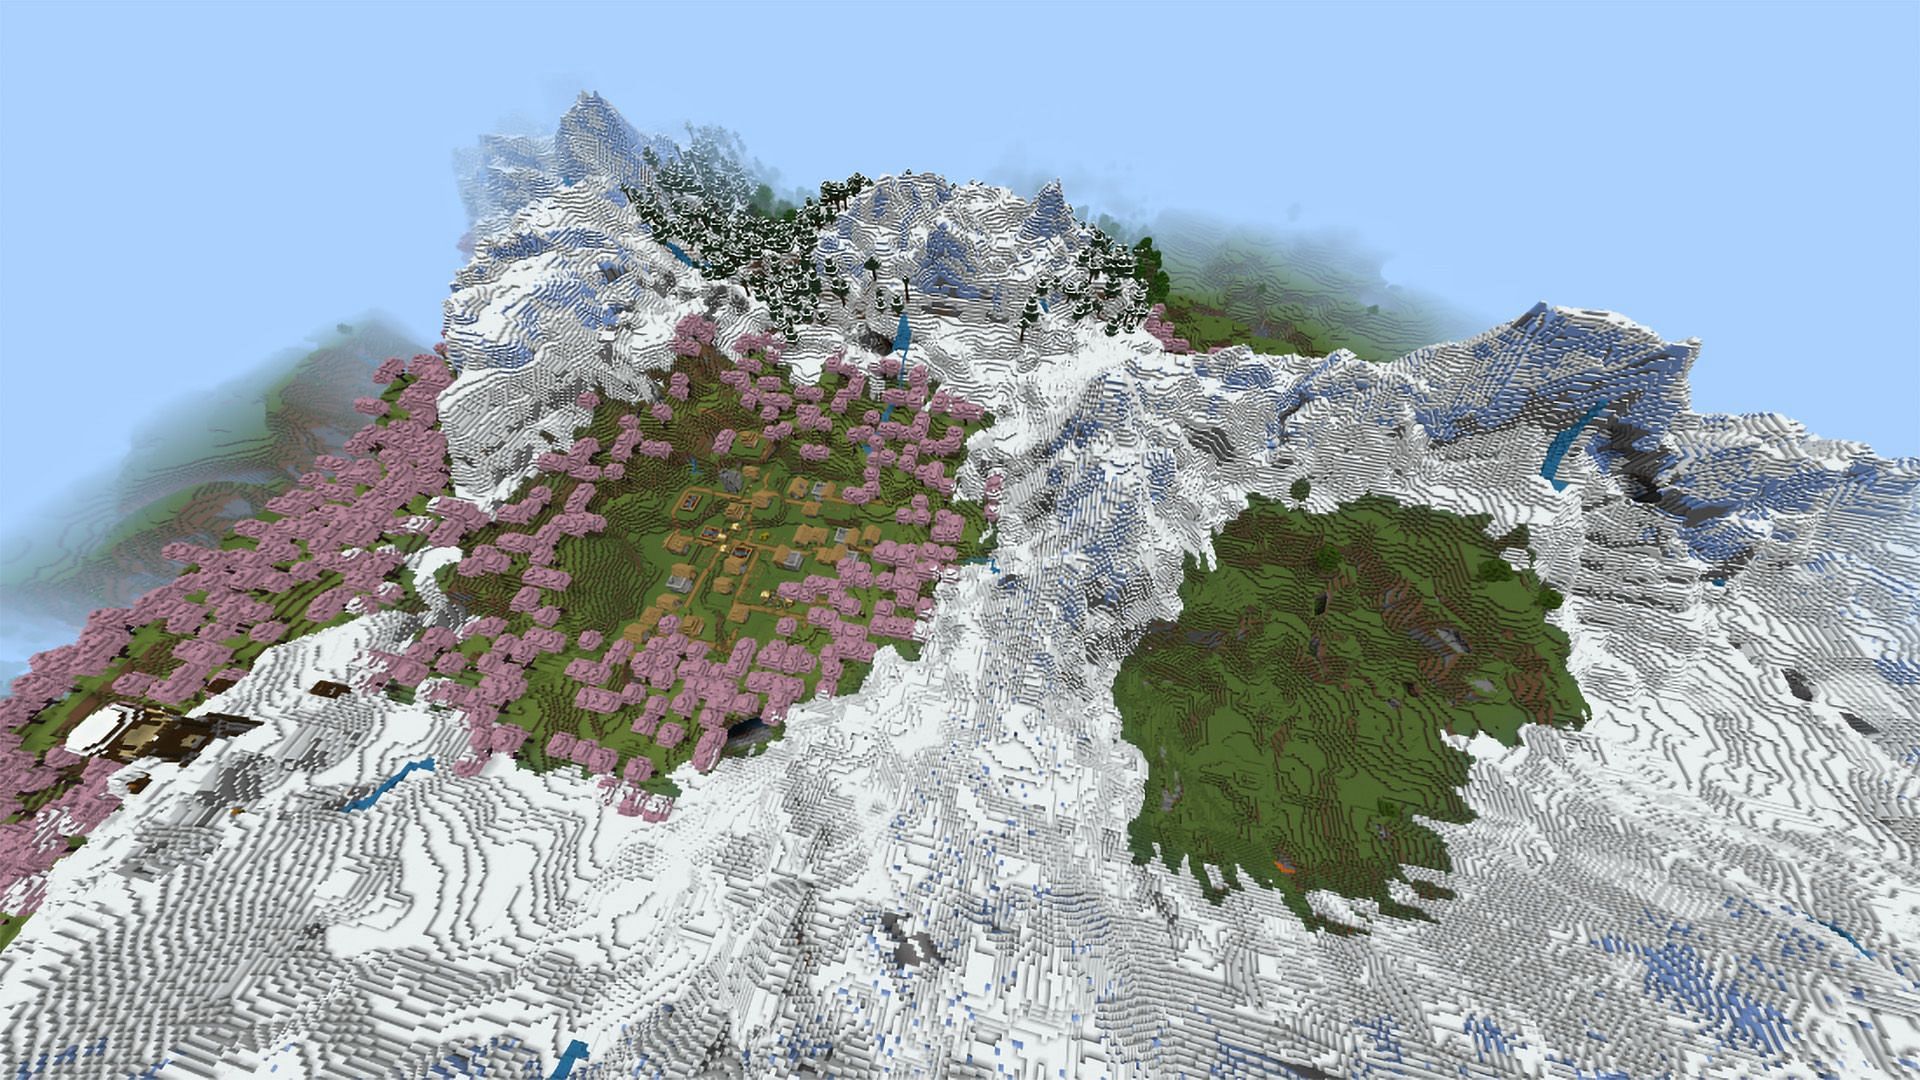 The cherry grove and the snow mountains bring delights of nature in Minecraft (Image via Mojang)